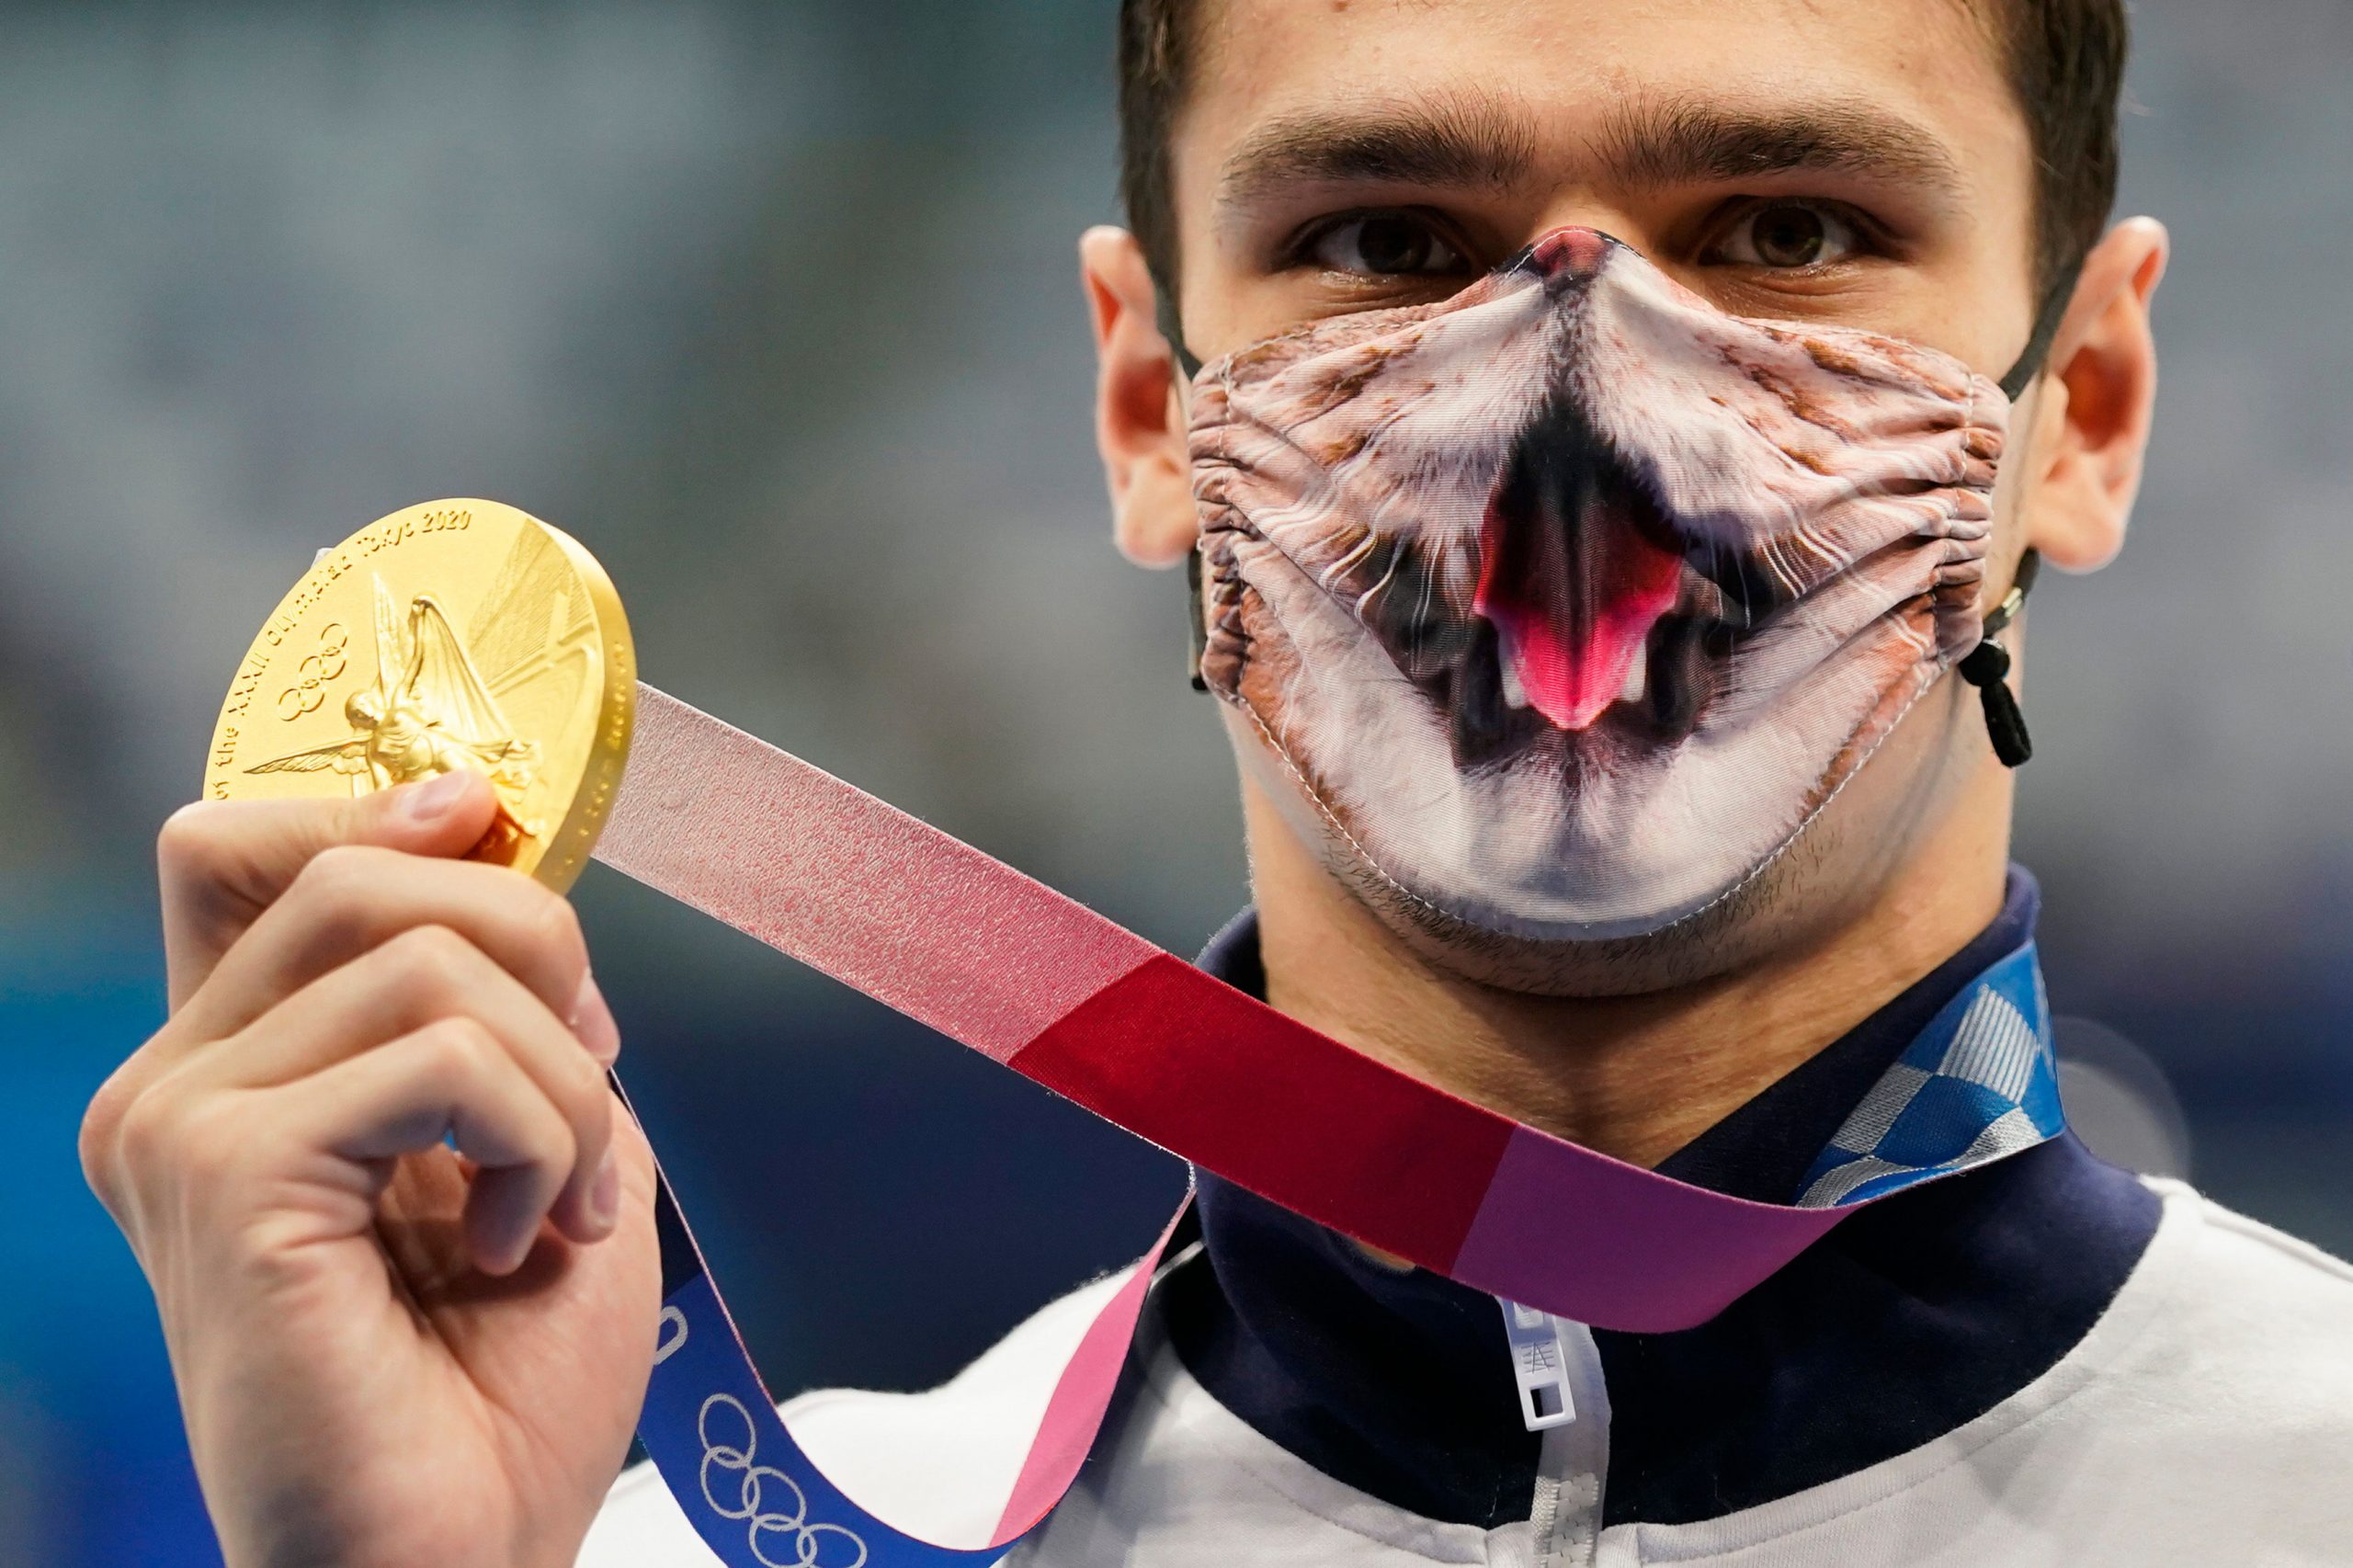 What is the real worth of an Olympic medal? Read on